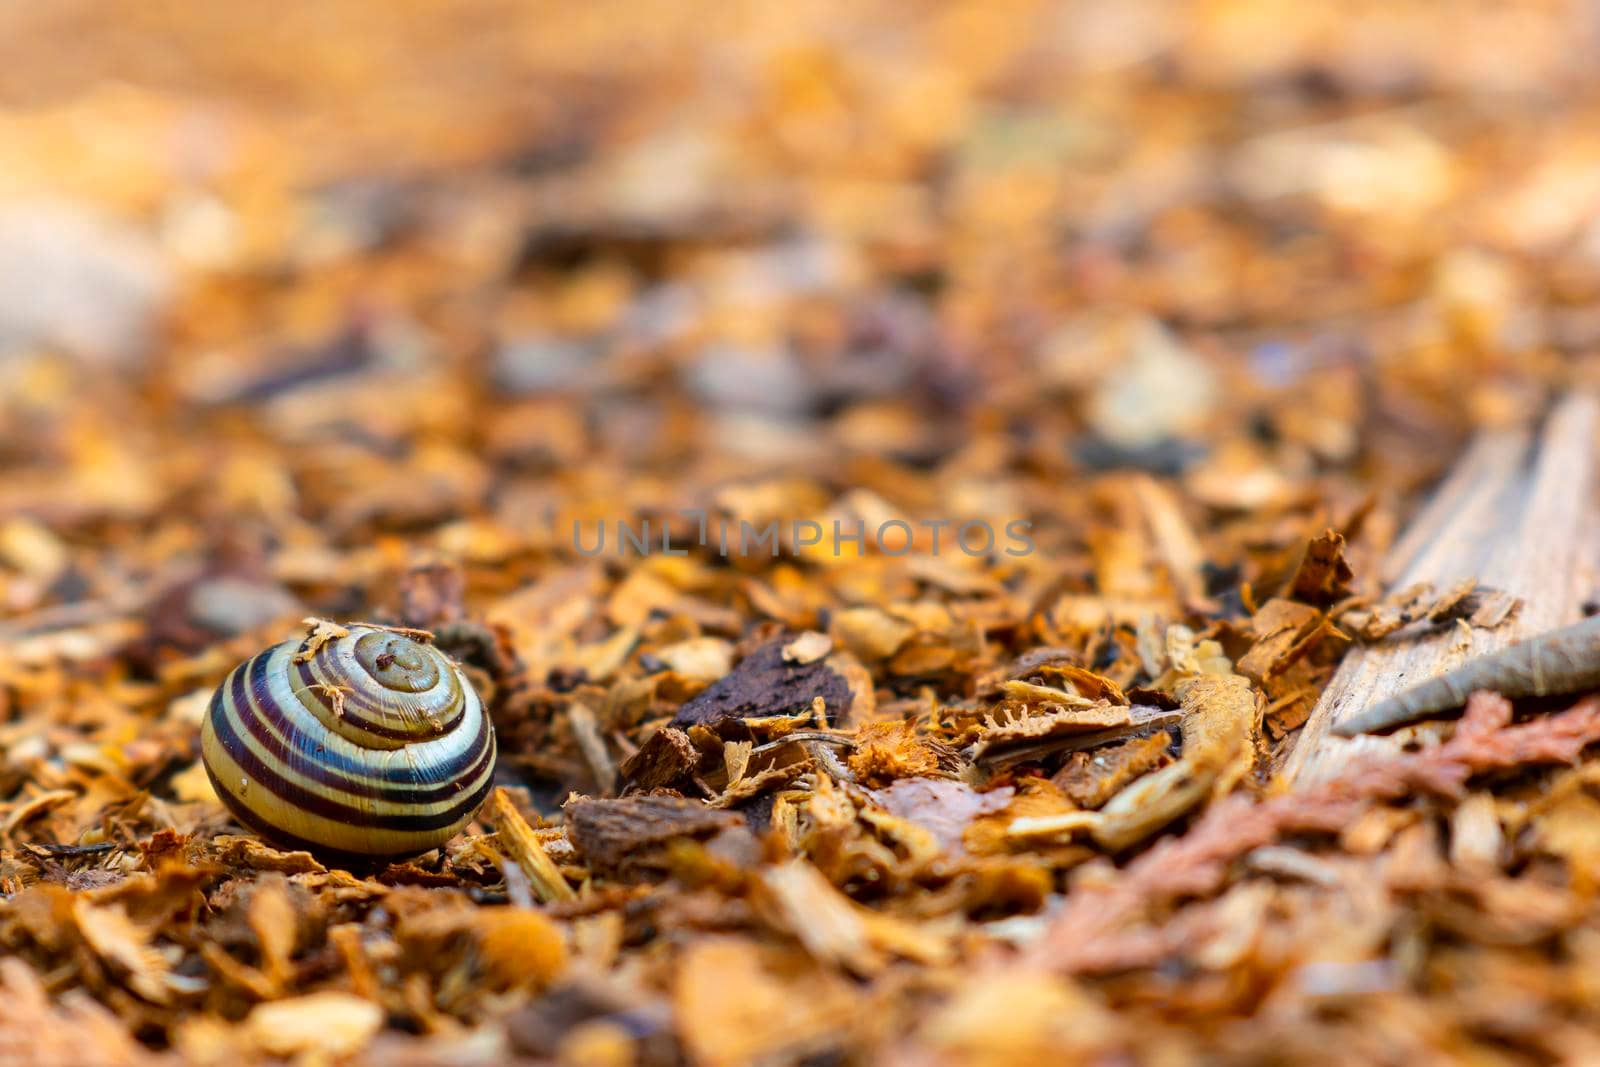 Striped snail shell in wood shavings at autumn.